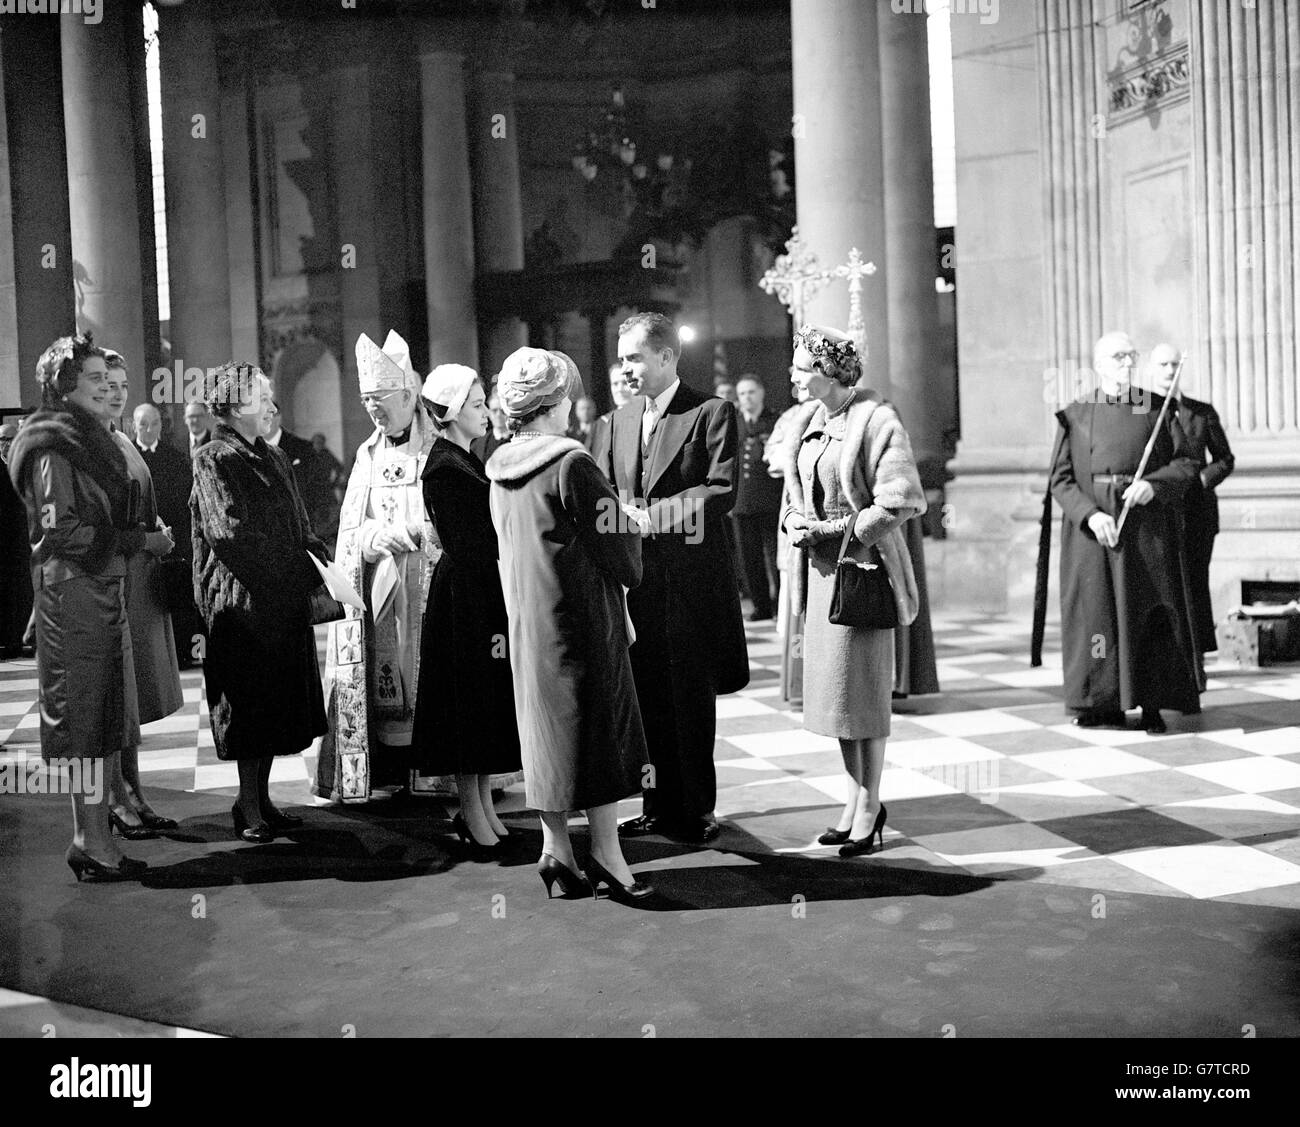 The Queen Mother and Princess Margaret talking with US Vice-President Richard Nixon and Mrs. Nixon after the dedication of the American Memorial Chapel in St. Paul's Cathedral, London. At left, the Princess Royal, the Duchess of Kent, and Princess Alexandra of Kent talk with the Archbishop of Canterbury, Dr. Geoffrey Fisher. The Chapel is Britain's tribute to 28,000 members of the American Armed Forces who died in the last war in operations based in this country. Stock Photo